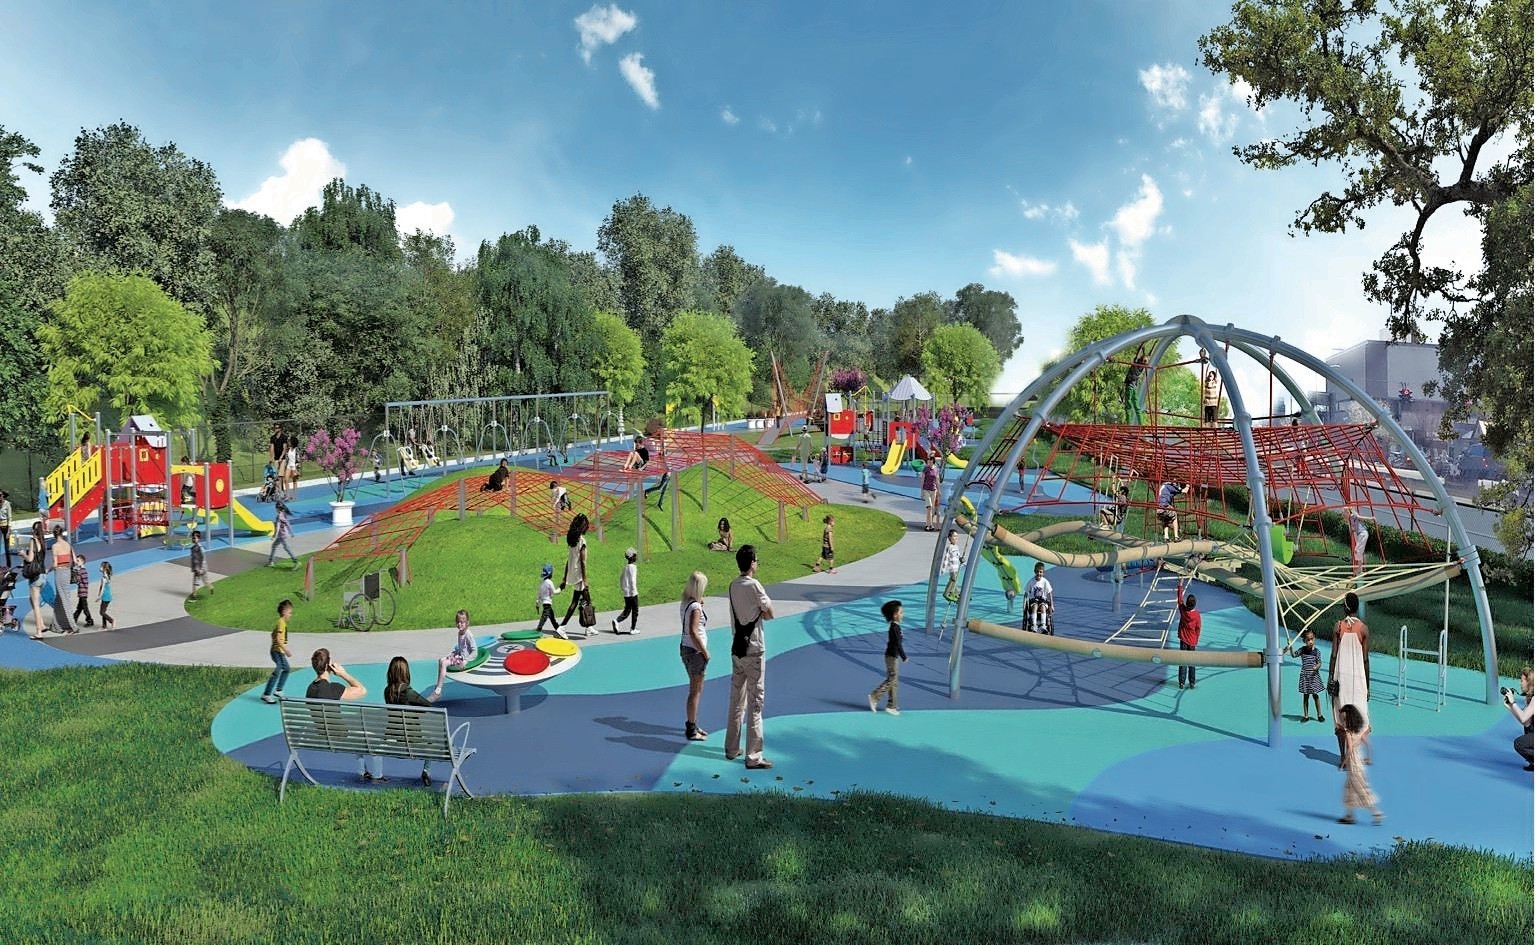 Proceeds of the event will help fund a special-needs-accessible playground planned for the corner adjacent to the Hickey Field baseball diamond. The Tommy Brull Foundation has already raised more than $50,000 for the cause over the past few years.